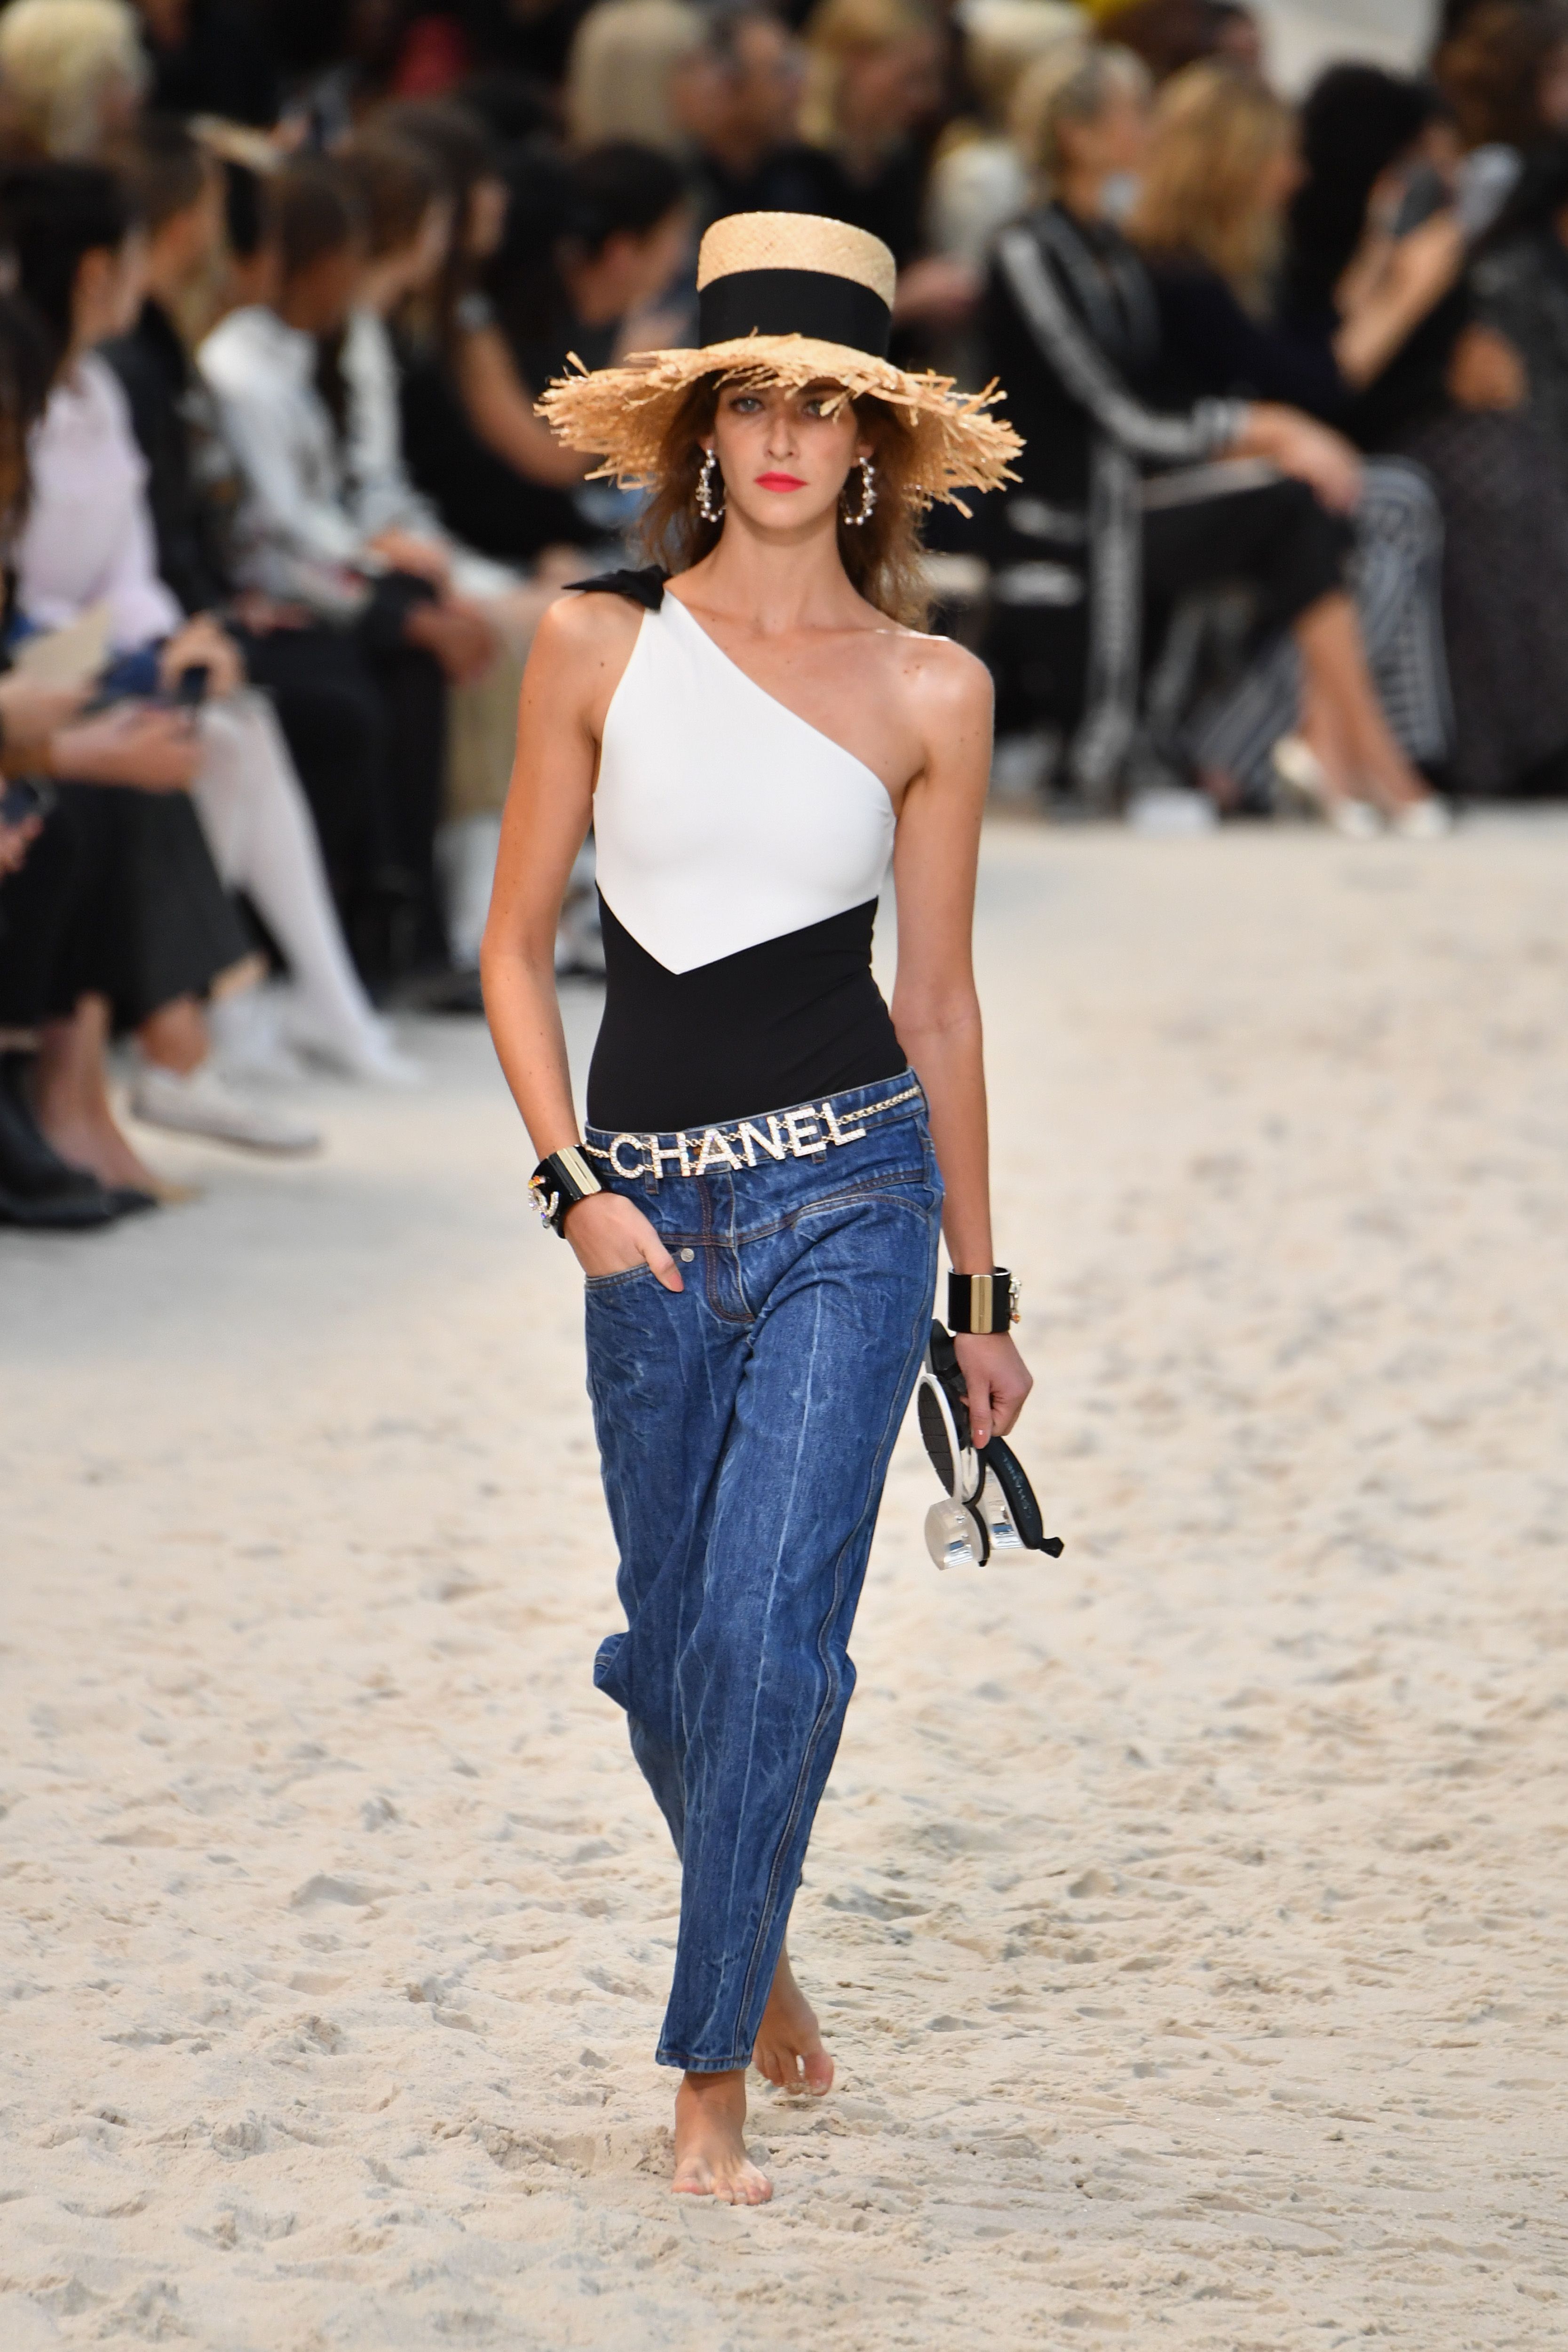 CHANEL 2019 19S Chanel by the Sea Runway 'CHA NEL' White Shirt 34